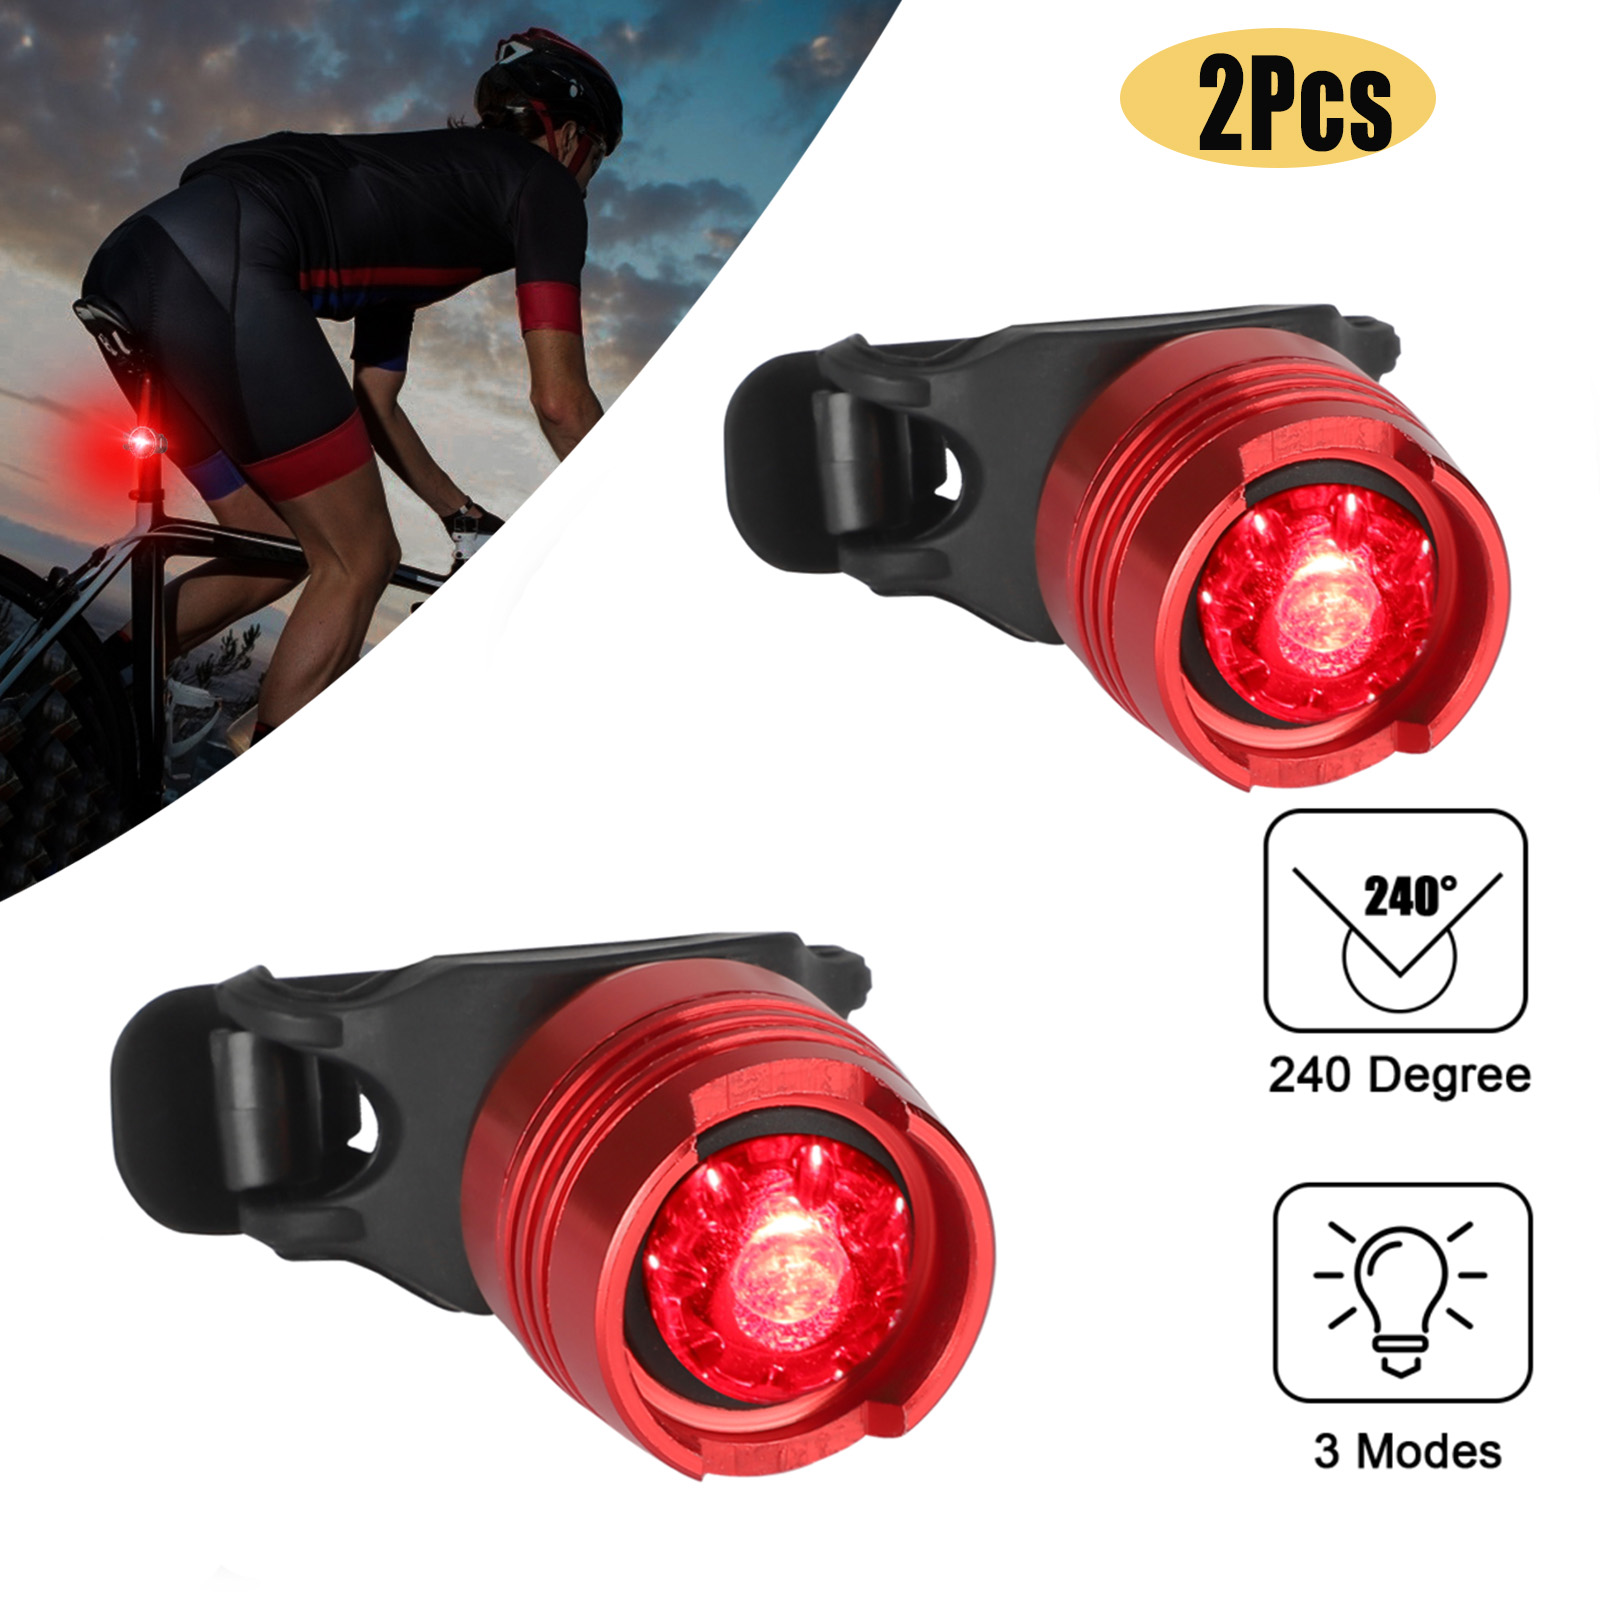 Details about   Cycling Bicycle Mountain Bike Tail Light Rear Led Warning Lamp  3 